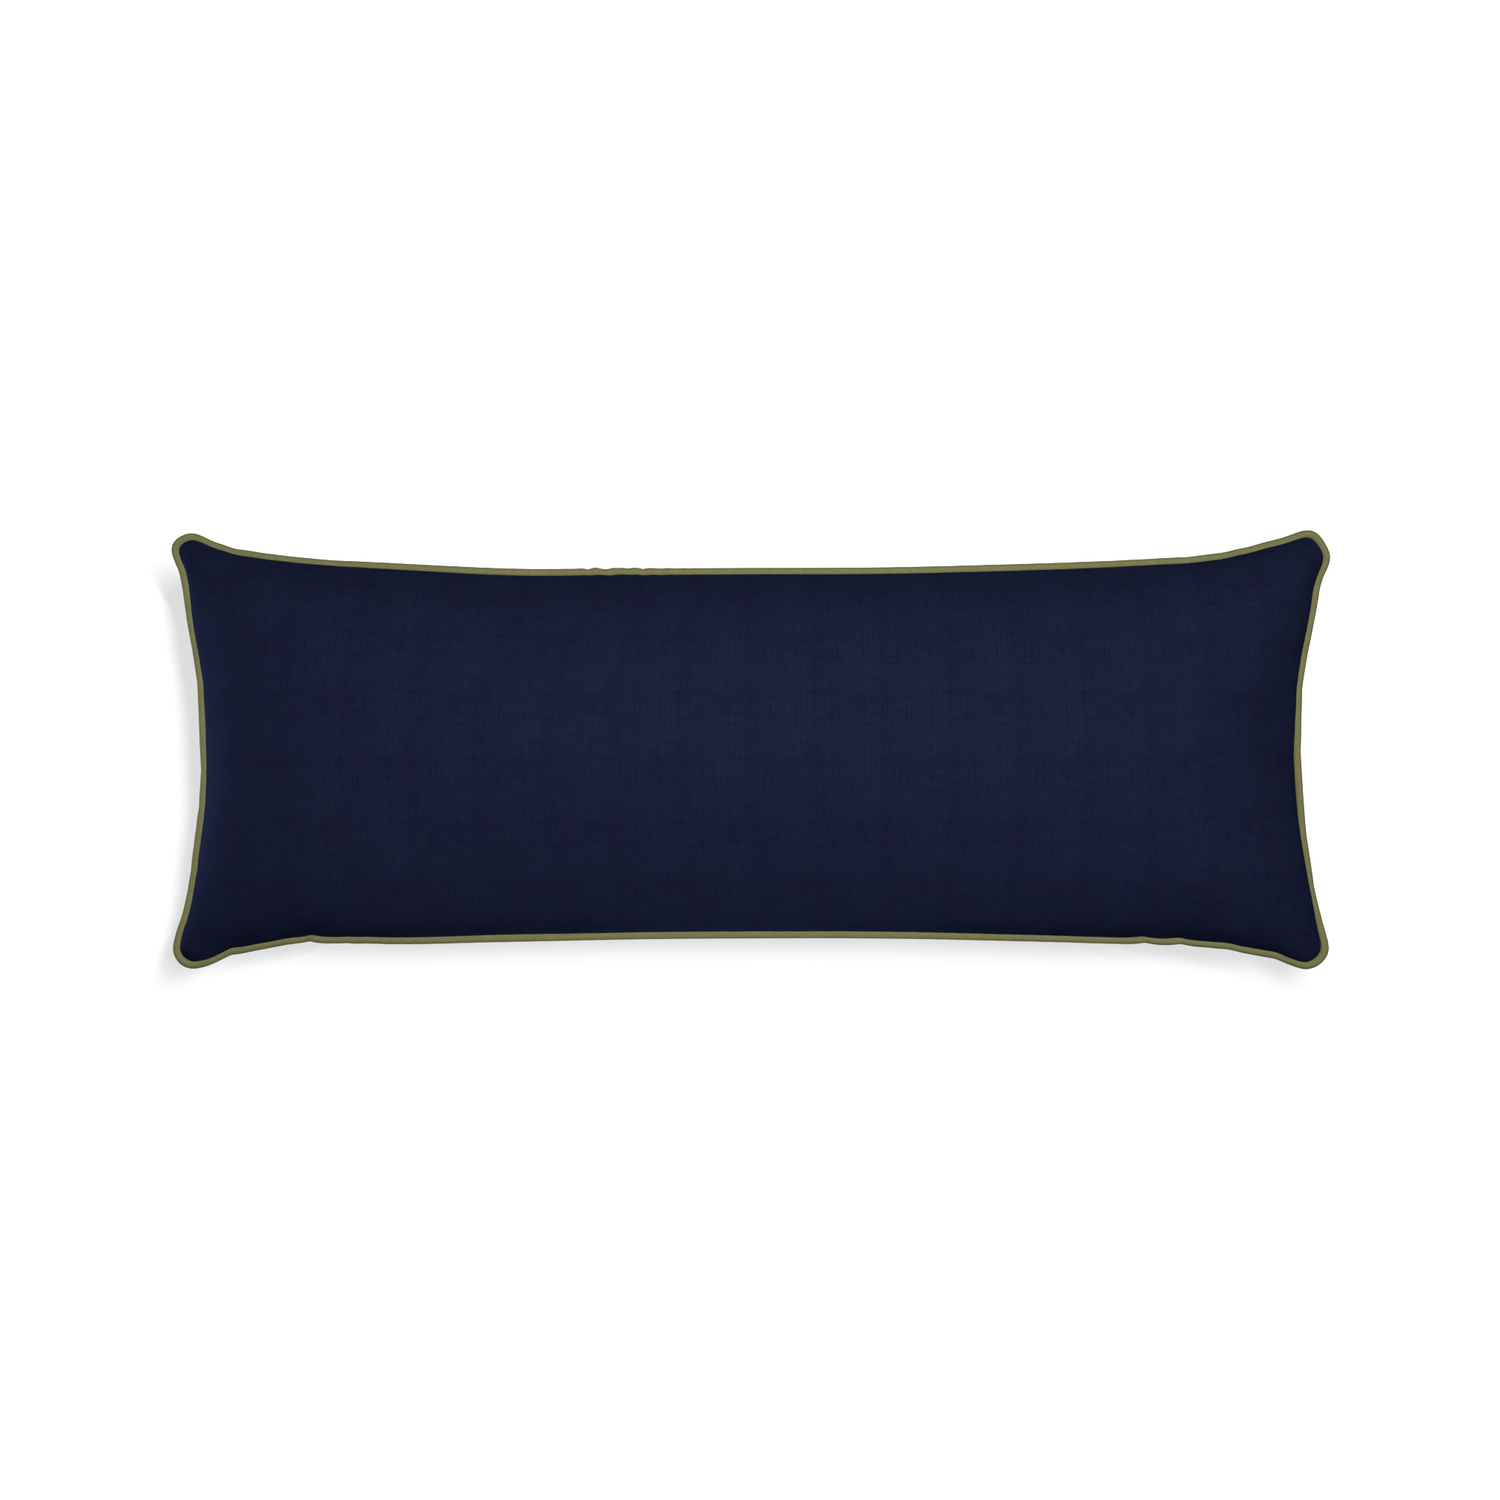 rectangle navy blue pillow with moss green piping 